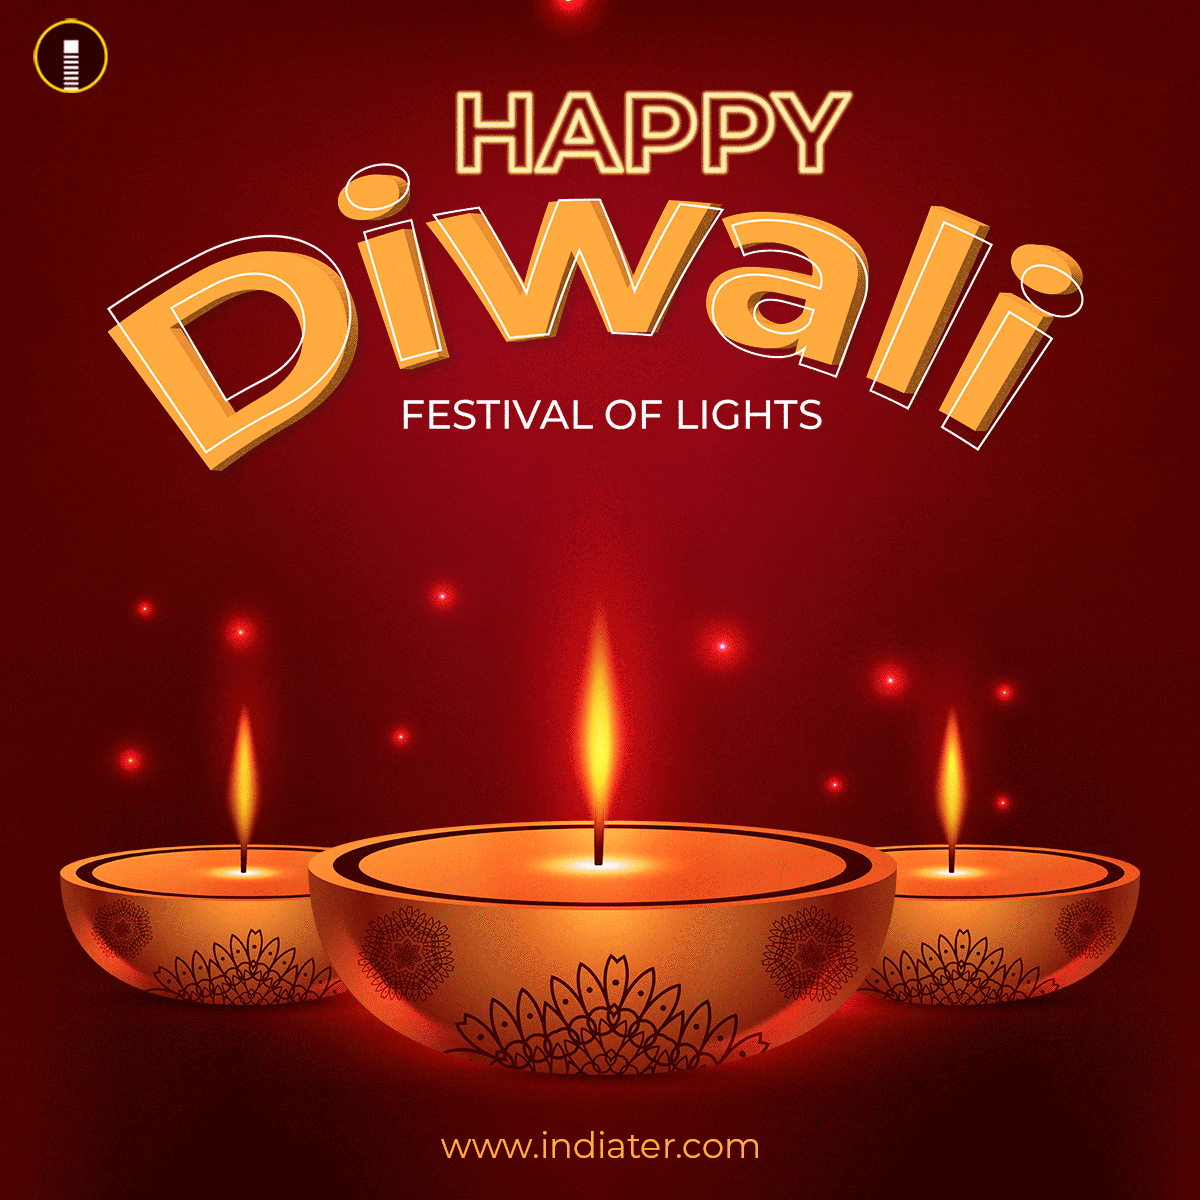 Happy Diwali Wishes Animation GIF Free Download - Indiater